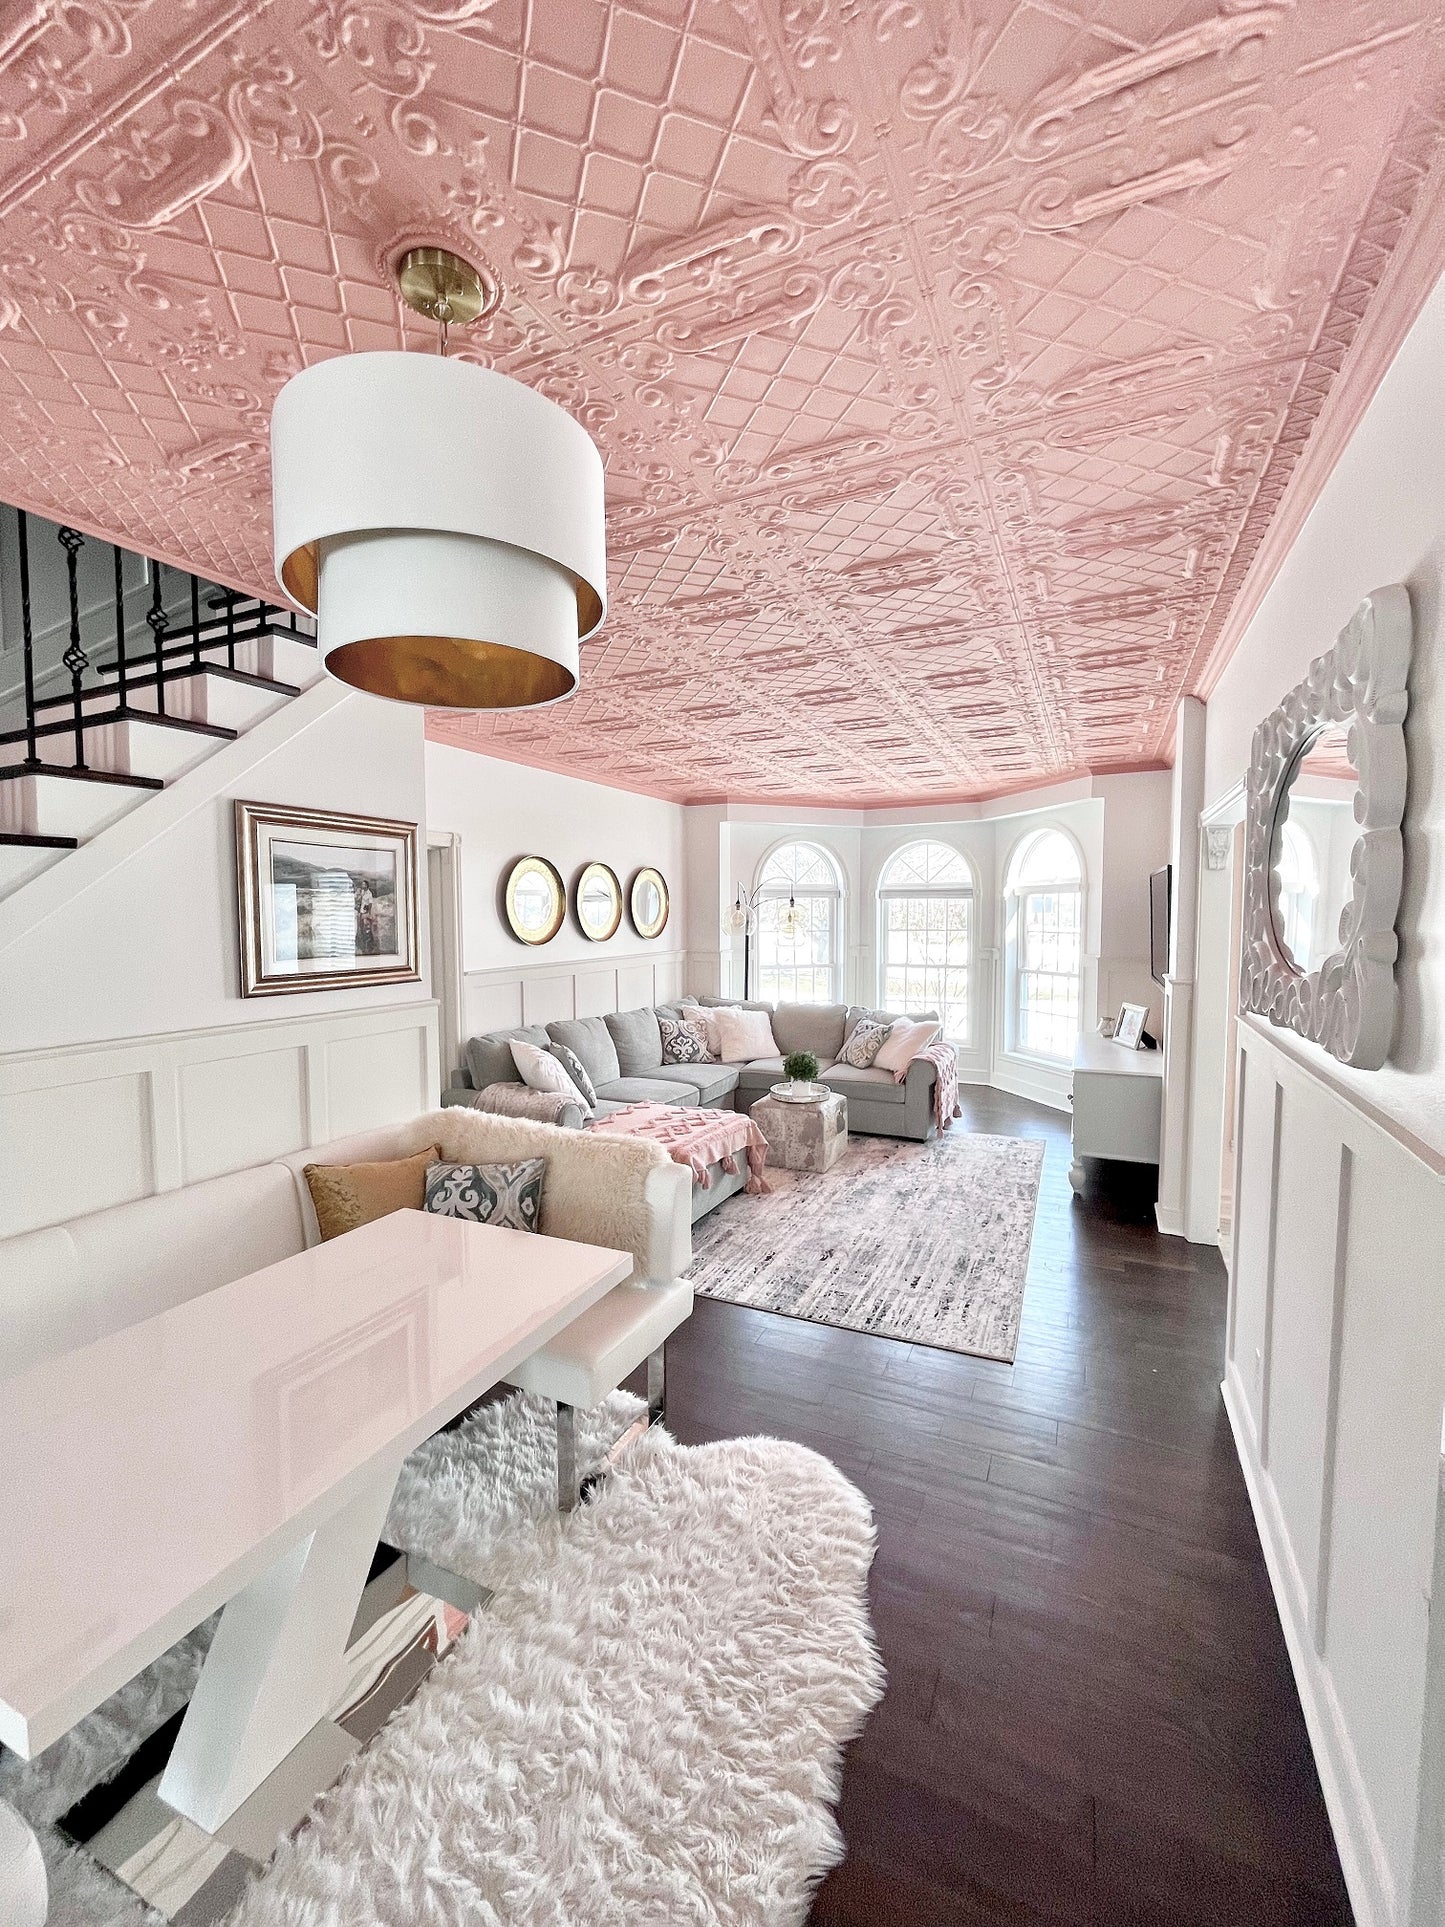 dining room with white and gold chandelier, pink room with white chandelier